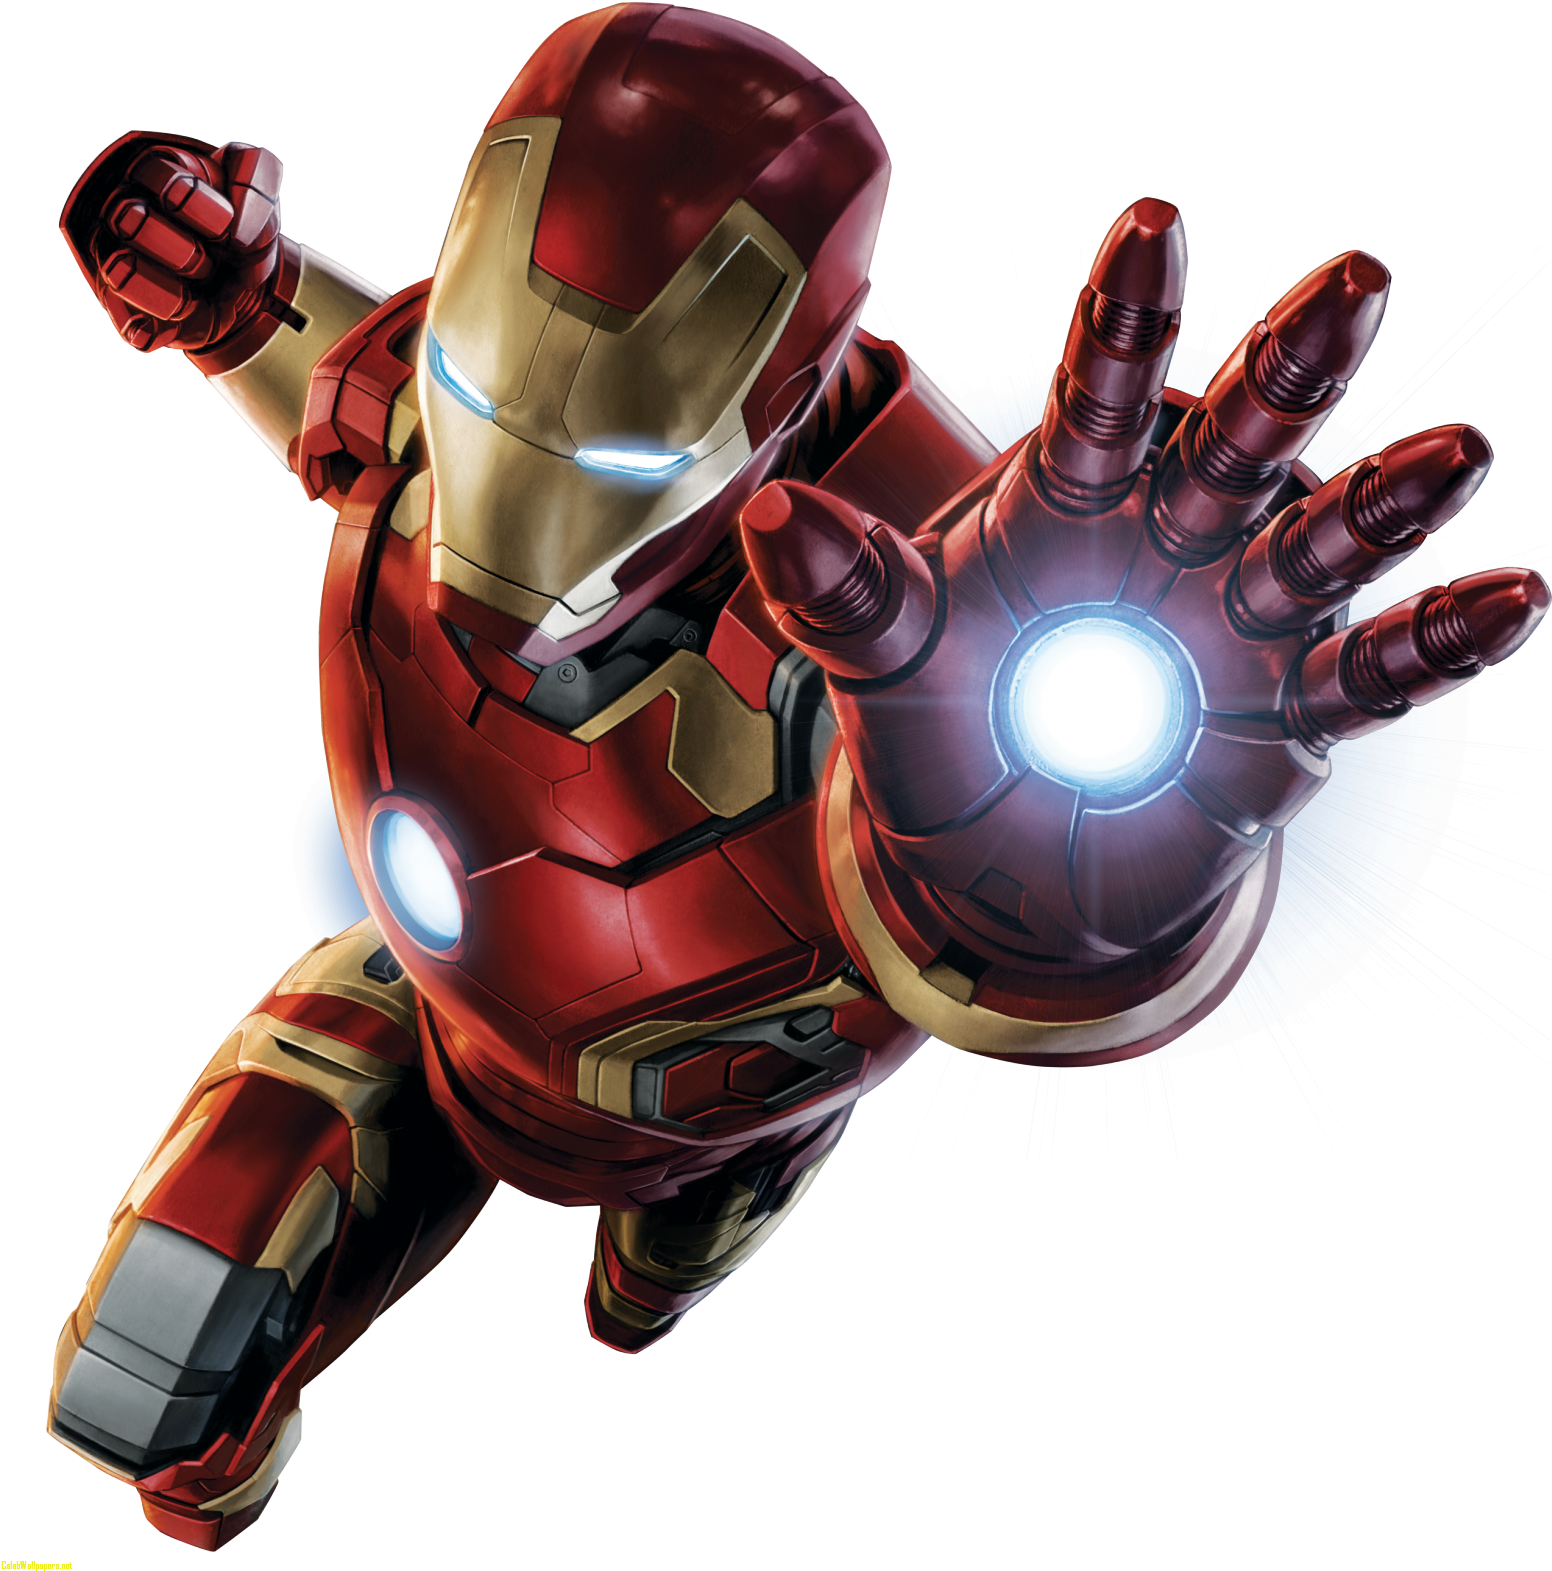 Quality Image Of Iron Man For Mobile And Desktop - Transparent Background Iron Man Png Clipart (1600x1631), Png Download